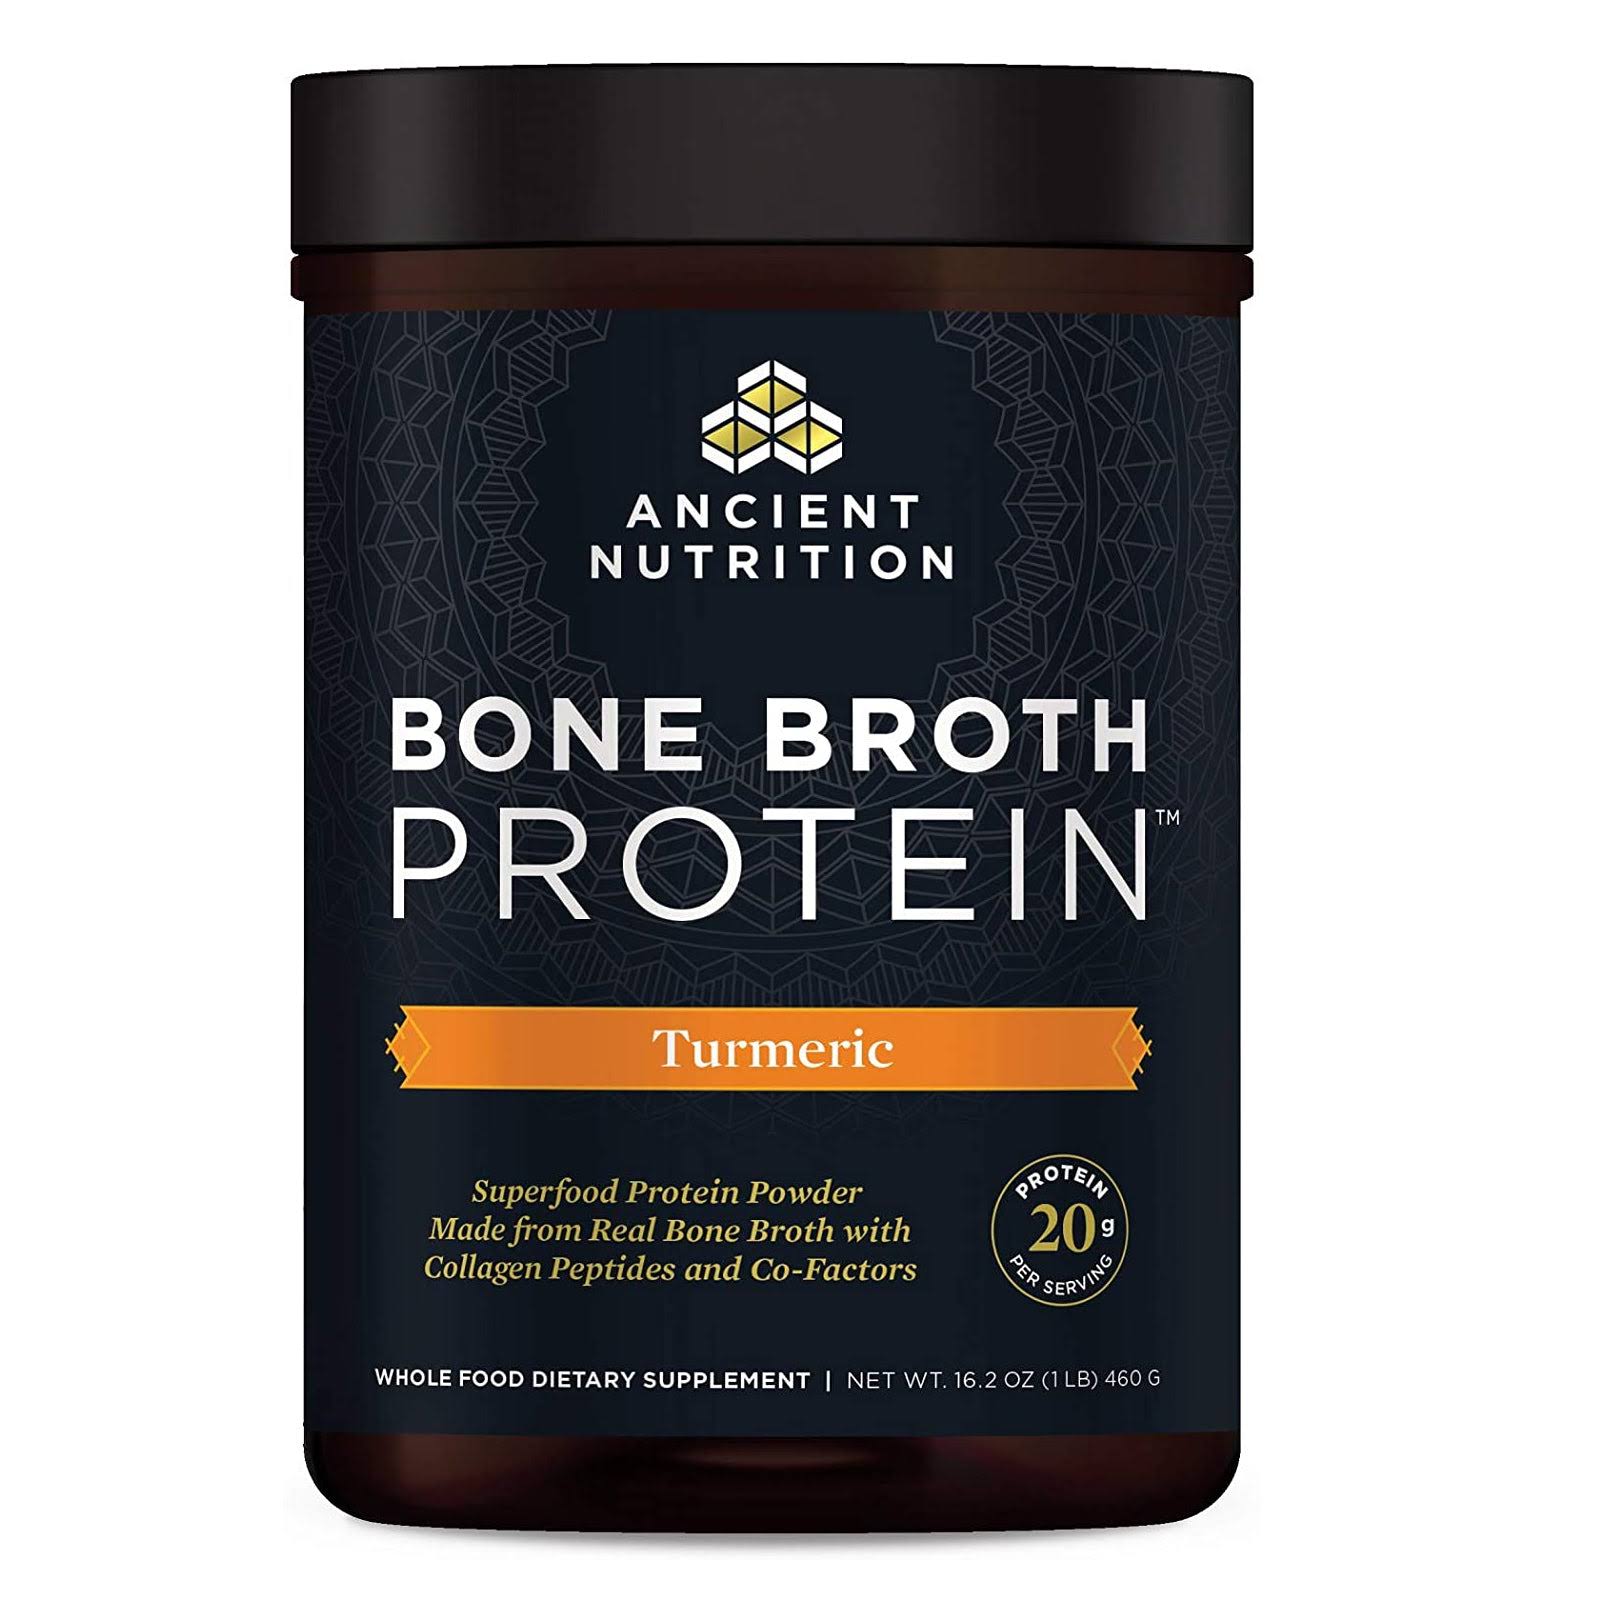 Ancient Nutrition Bone Broth Protein Turmeric Sports Supplement - 460g